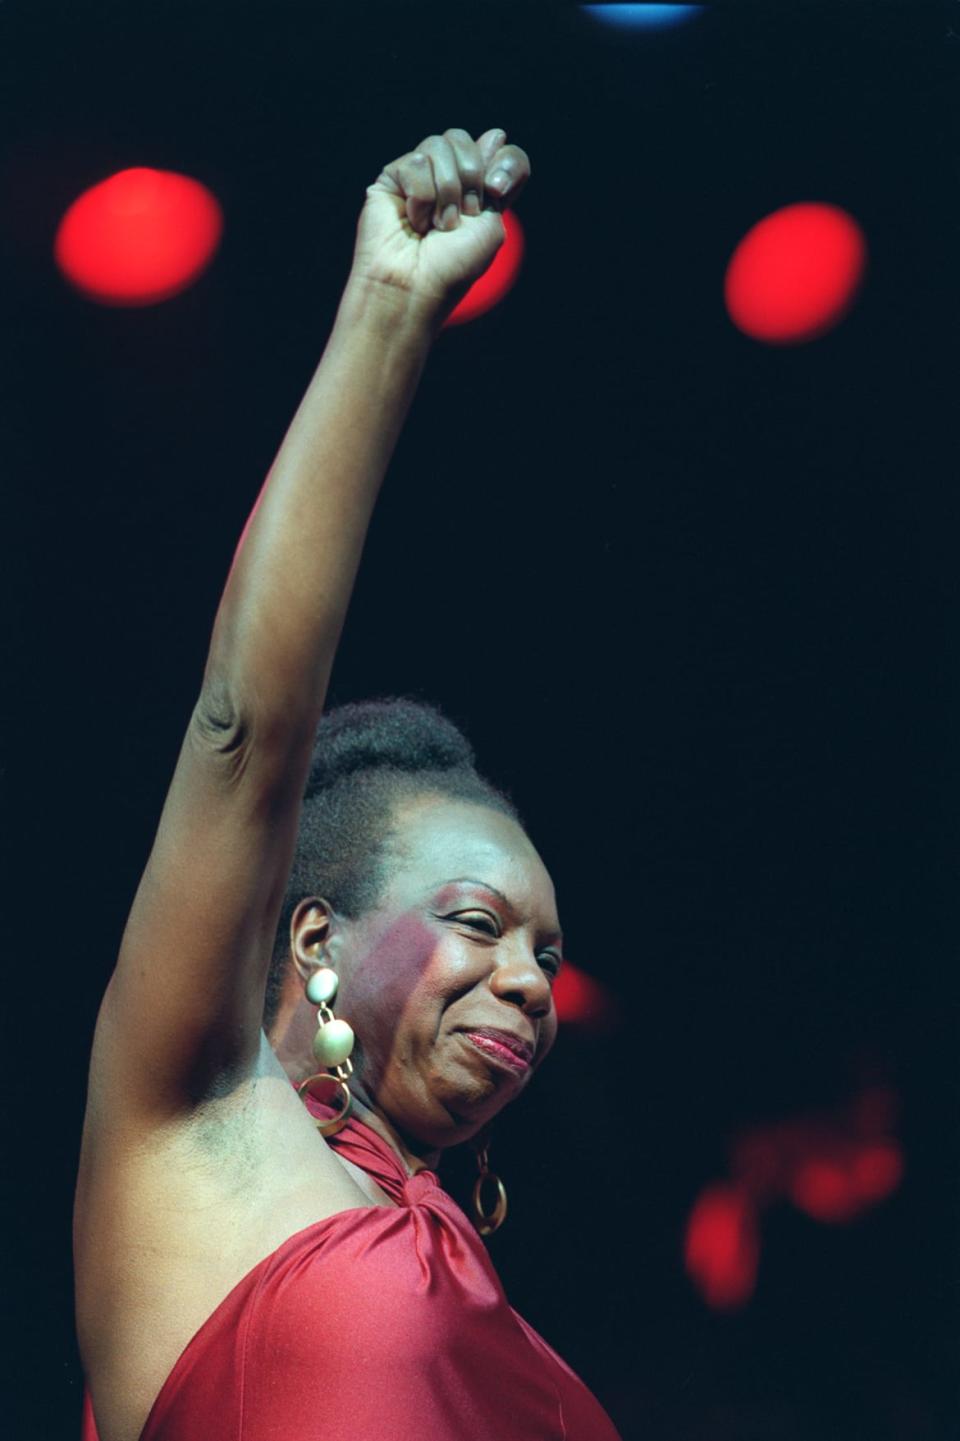 <div class="inline-image__caption"><p>Nina Simone in concert at the Olympia music hall in Paris on Oct. 22, 1991. </p></div> <div class="inline-image__credit">Bertrand Guay/AFP/Getty</div>